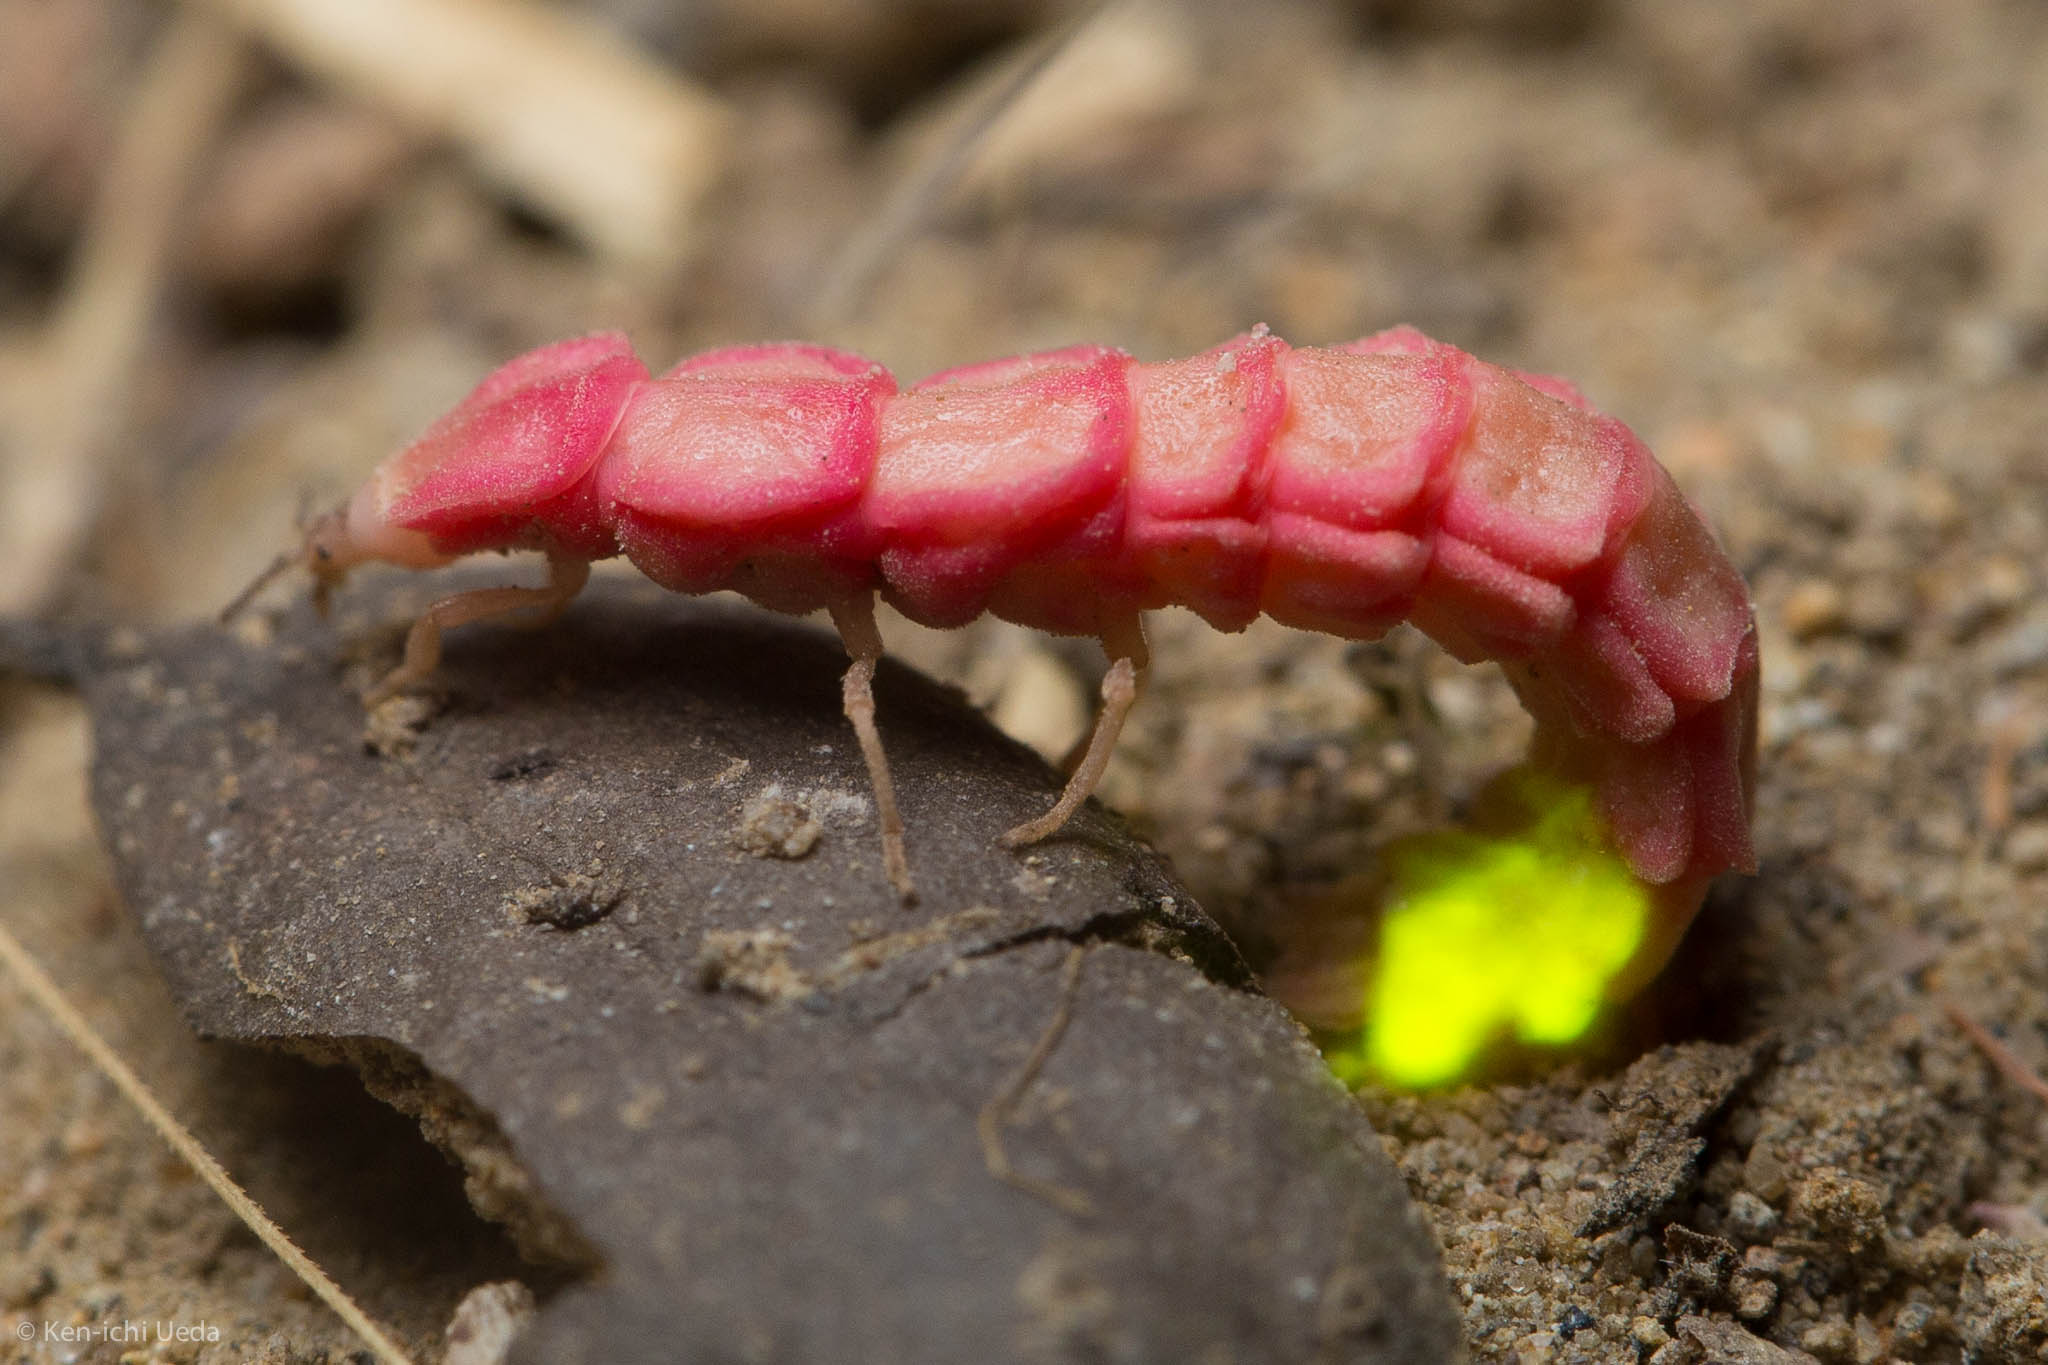 The California pink glow-worm really is pink